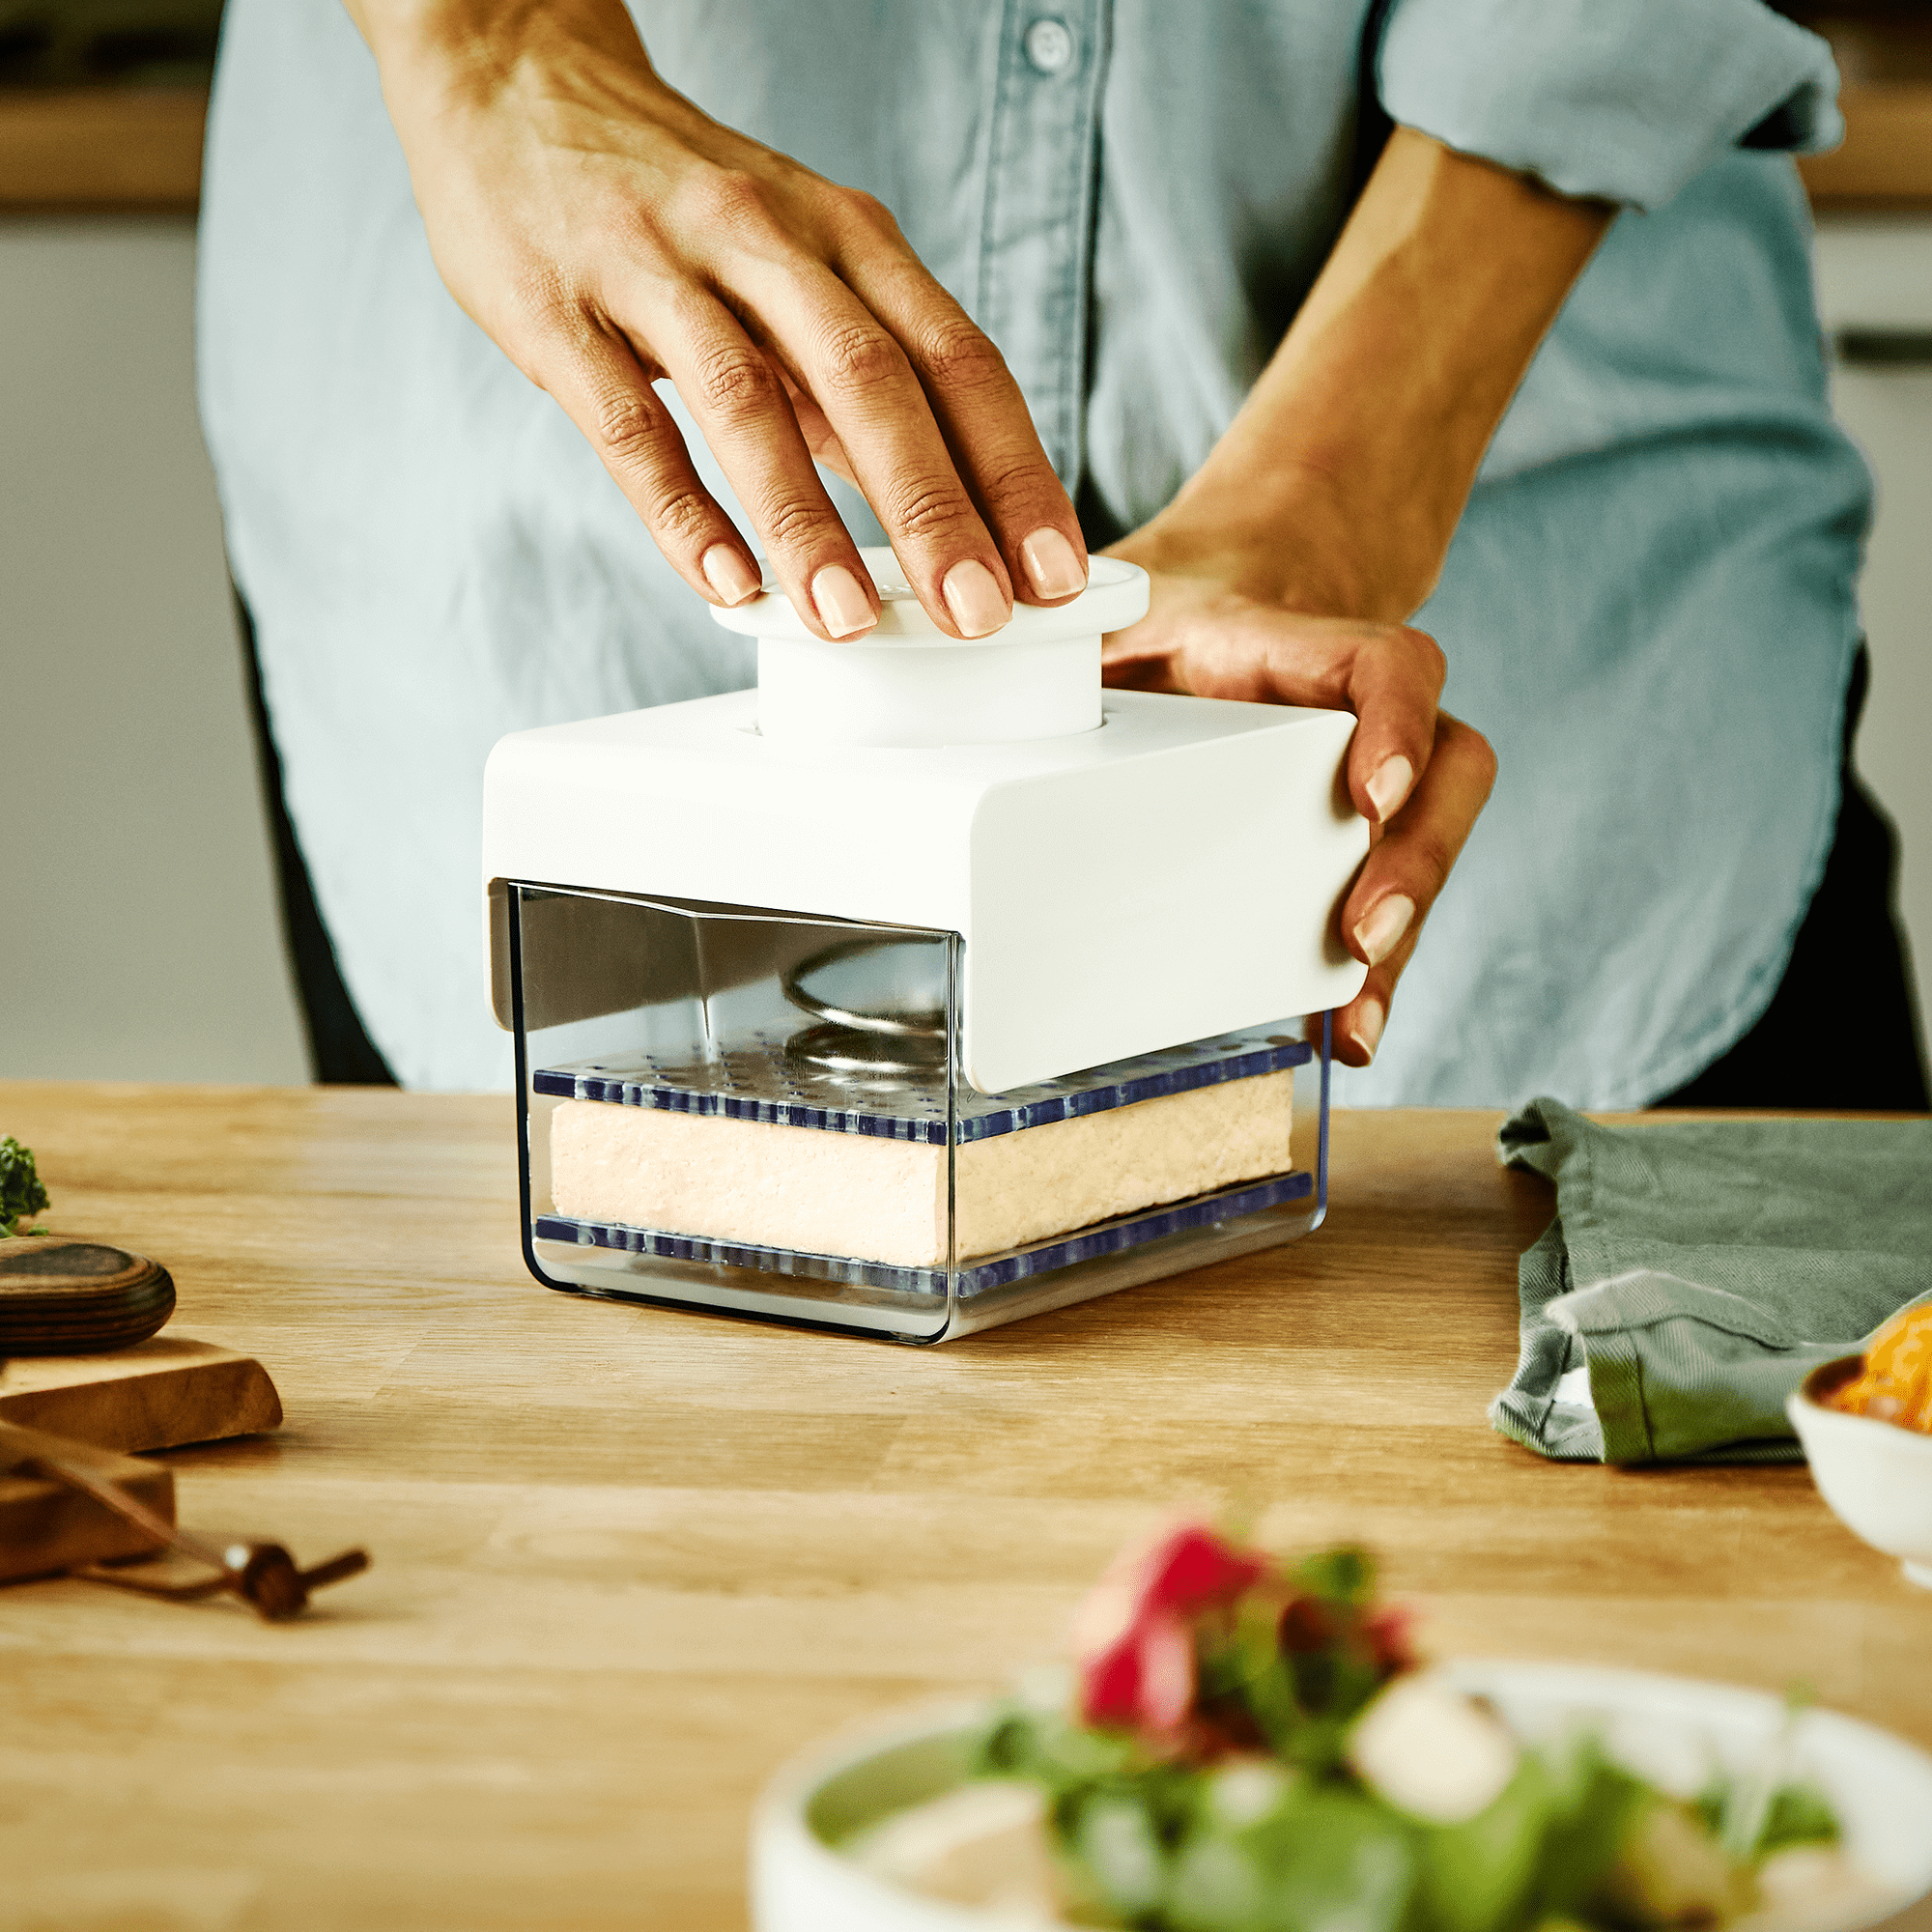 Tofu Press: The Real Deal About This Nifty Gadget - TofuBud